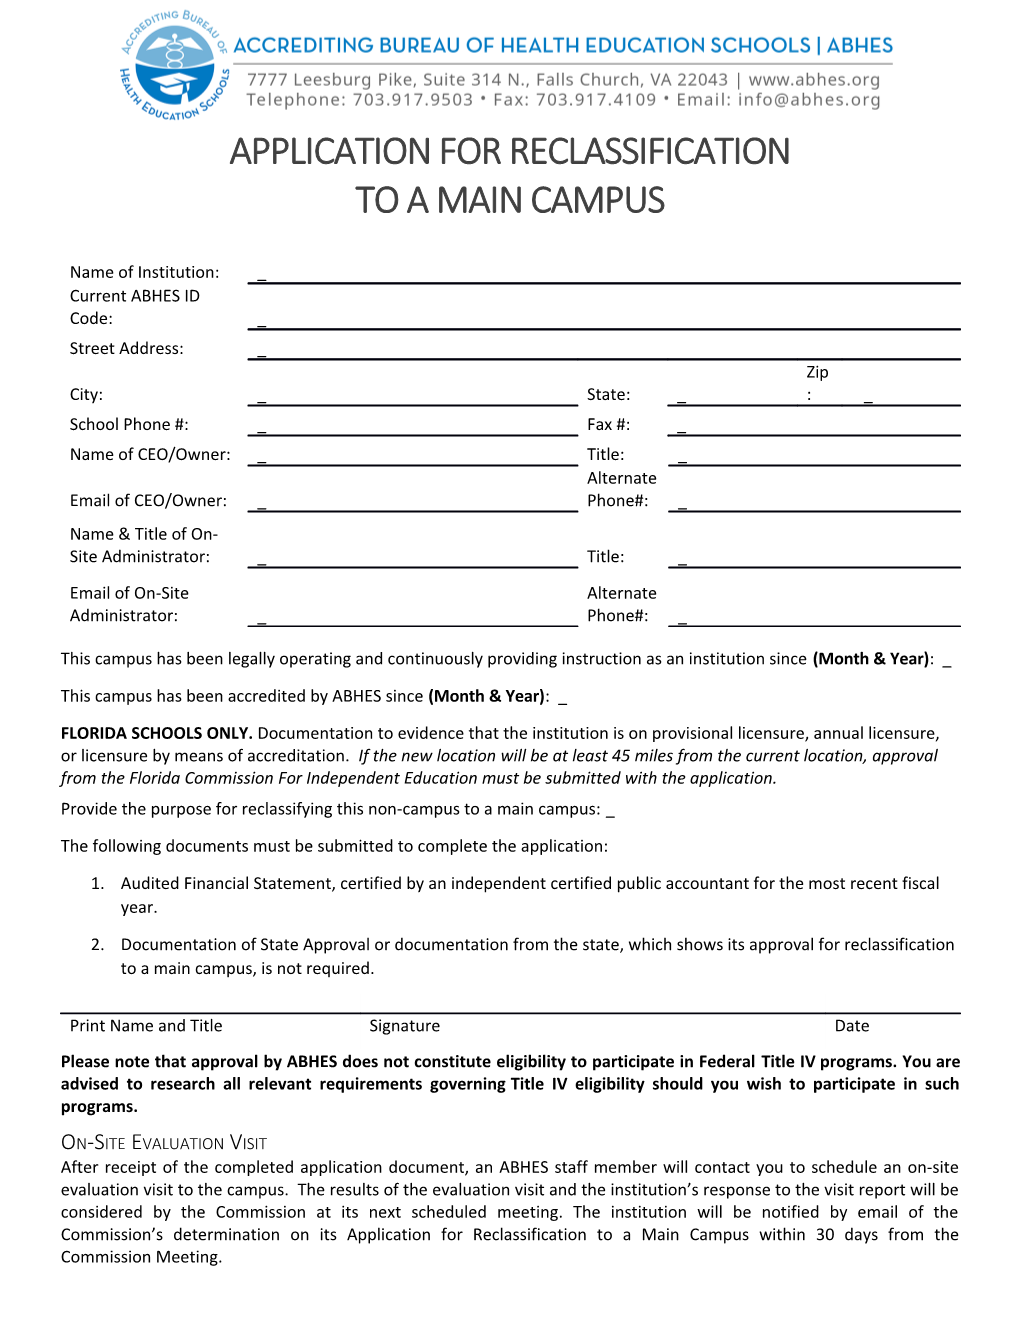 Application for Reclassification to a Main Campus